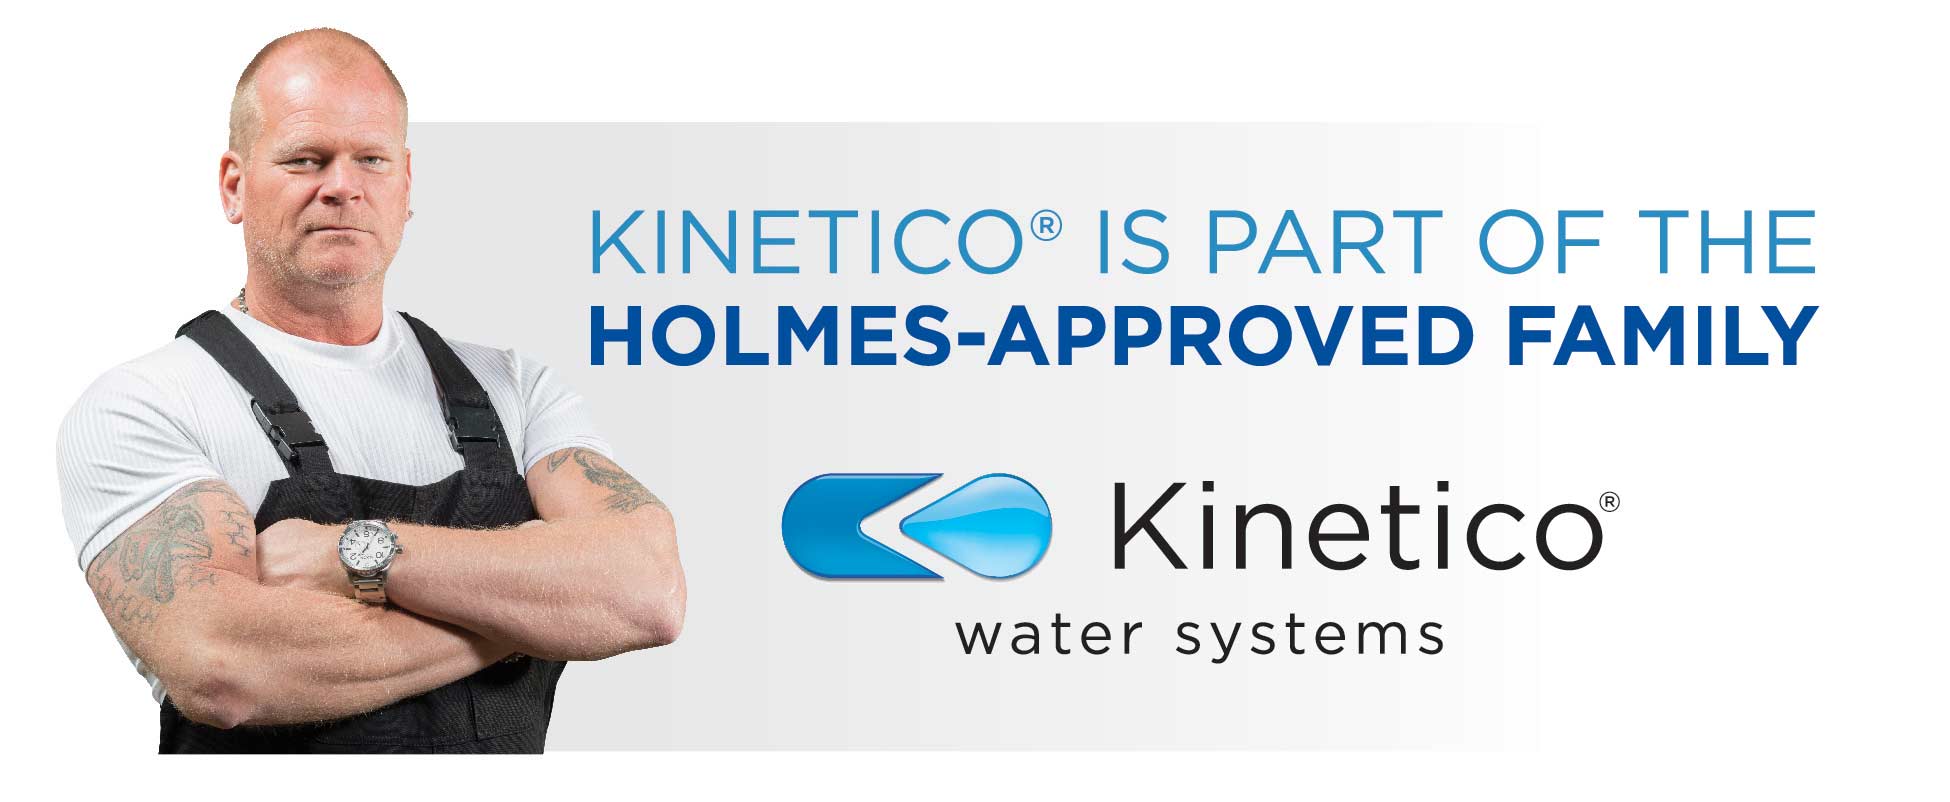 Kinetico is part of the Holmes approved family